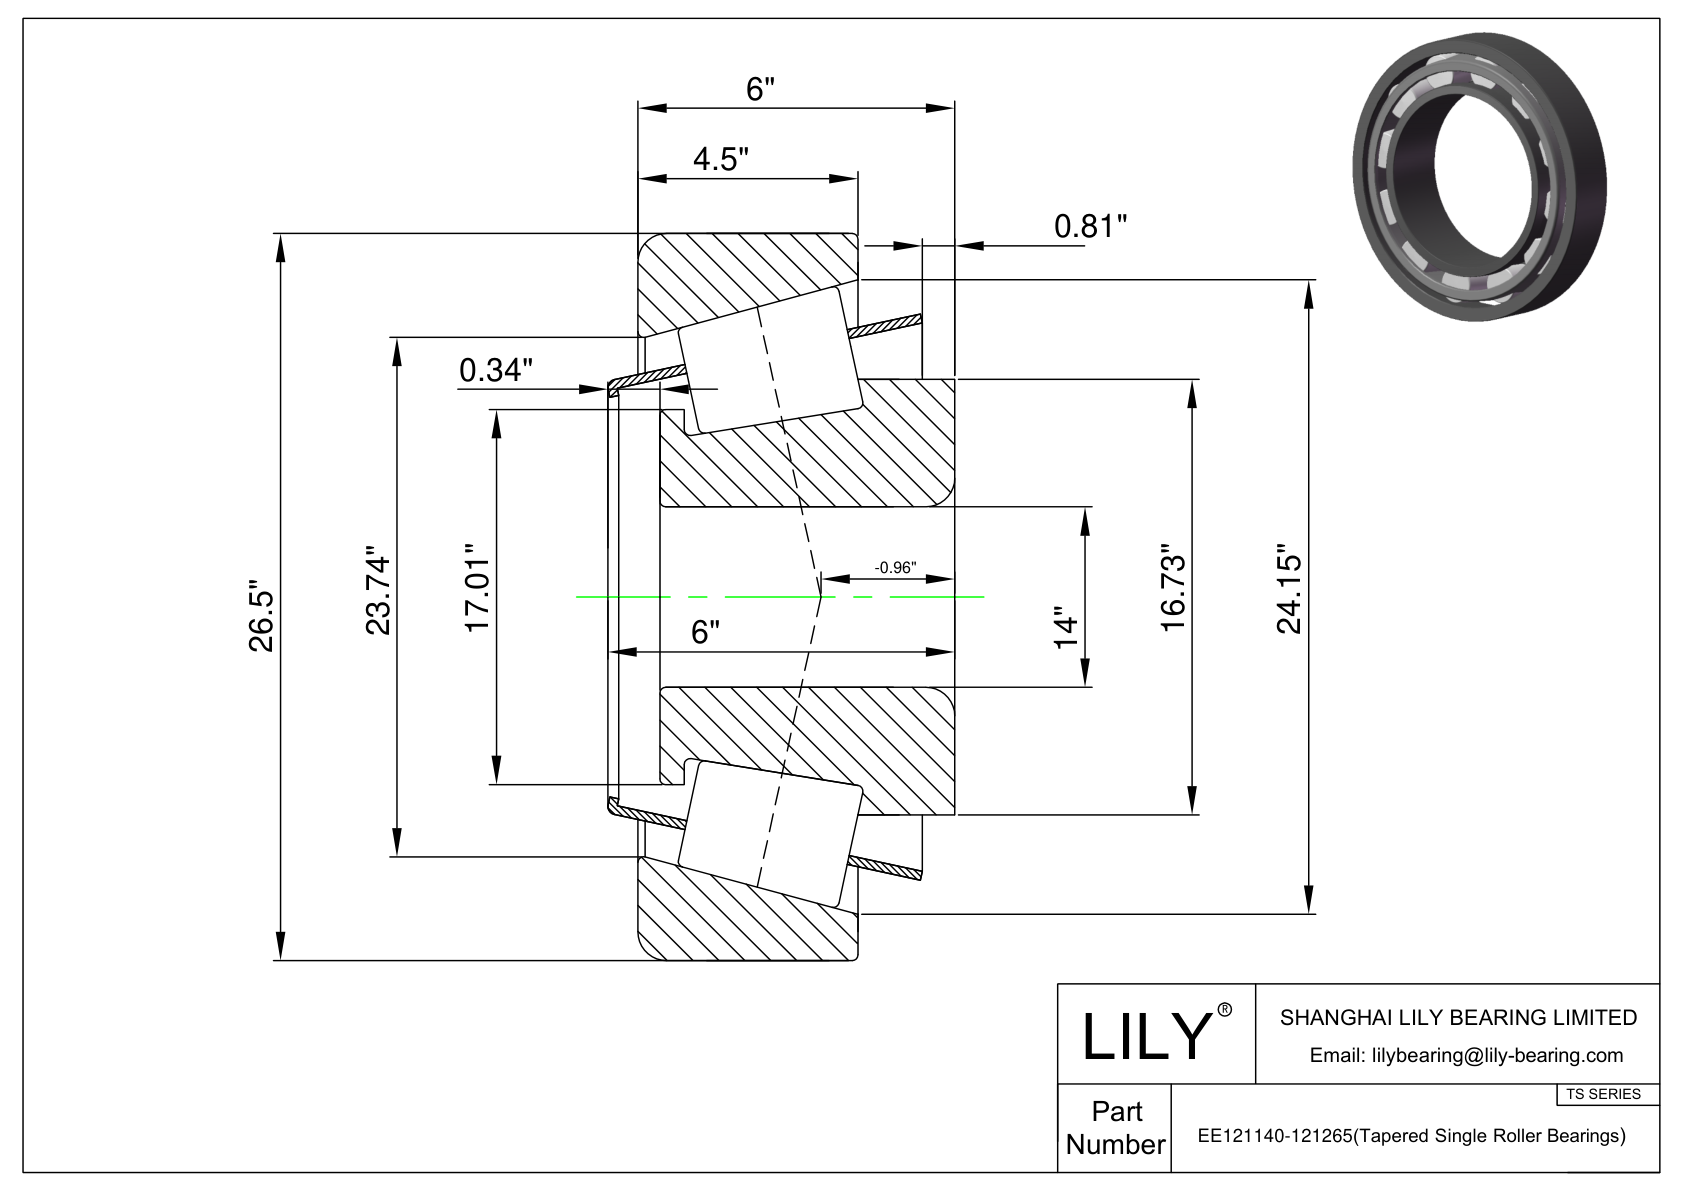 EE121140-121265 TS (Tapered Single Roller Bearings) (Imperial) cad drawing